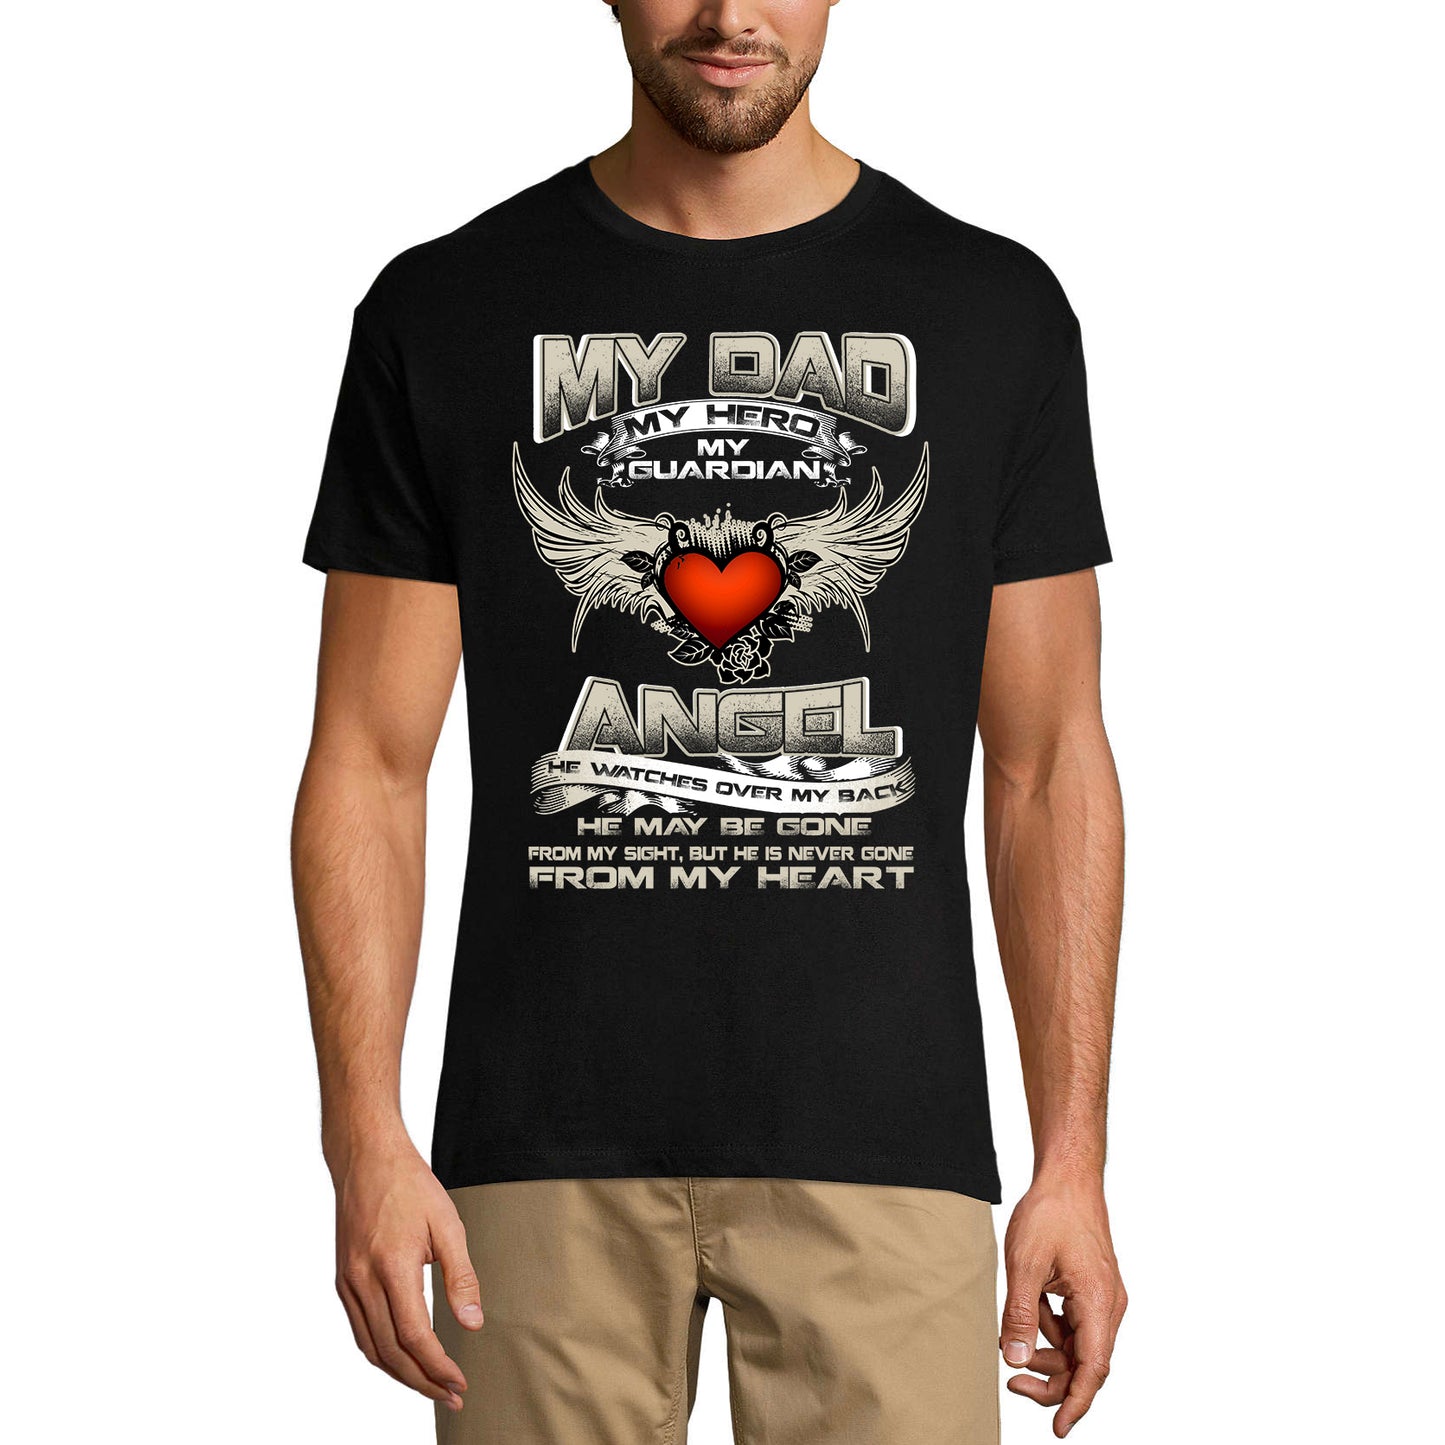 ULTRABASIC Men's Graphic T-Shirt My Dad My Hero My Guardian Angel - Emotional Quote